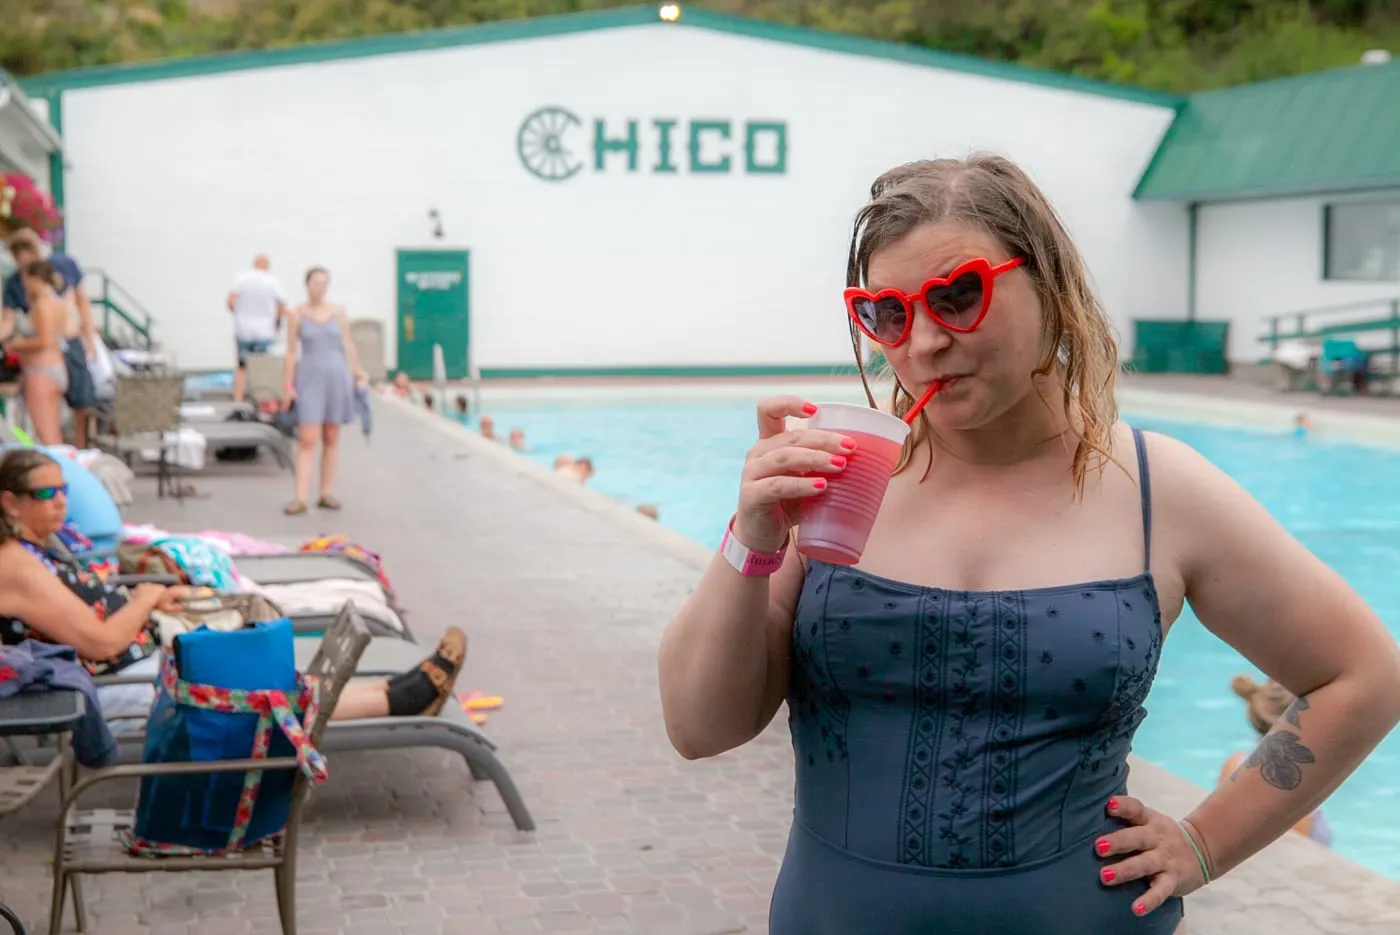 Drinking a Strawberry Daiquiri at Chico Hot Springs Resort and Day Spa in Montana | Montana Road trip stop near Yellowstone National Park